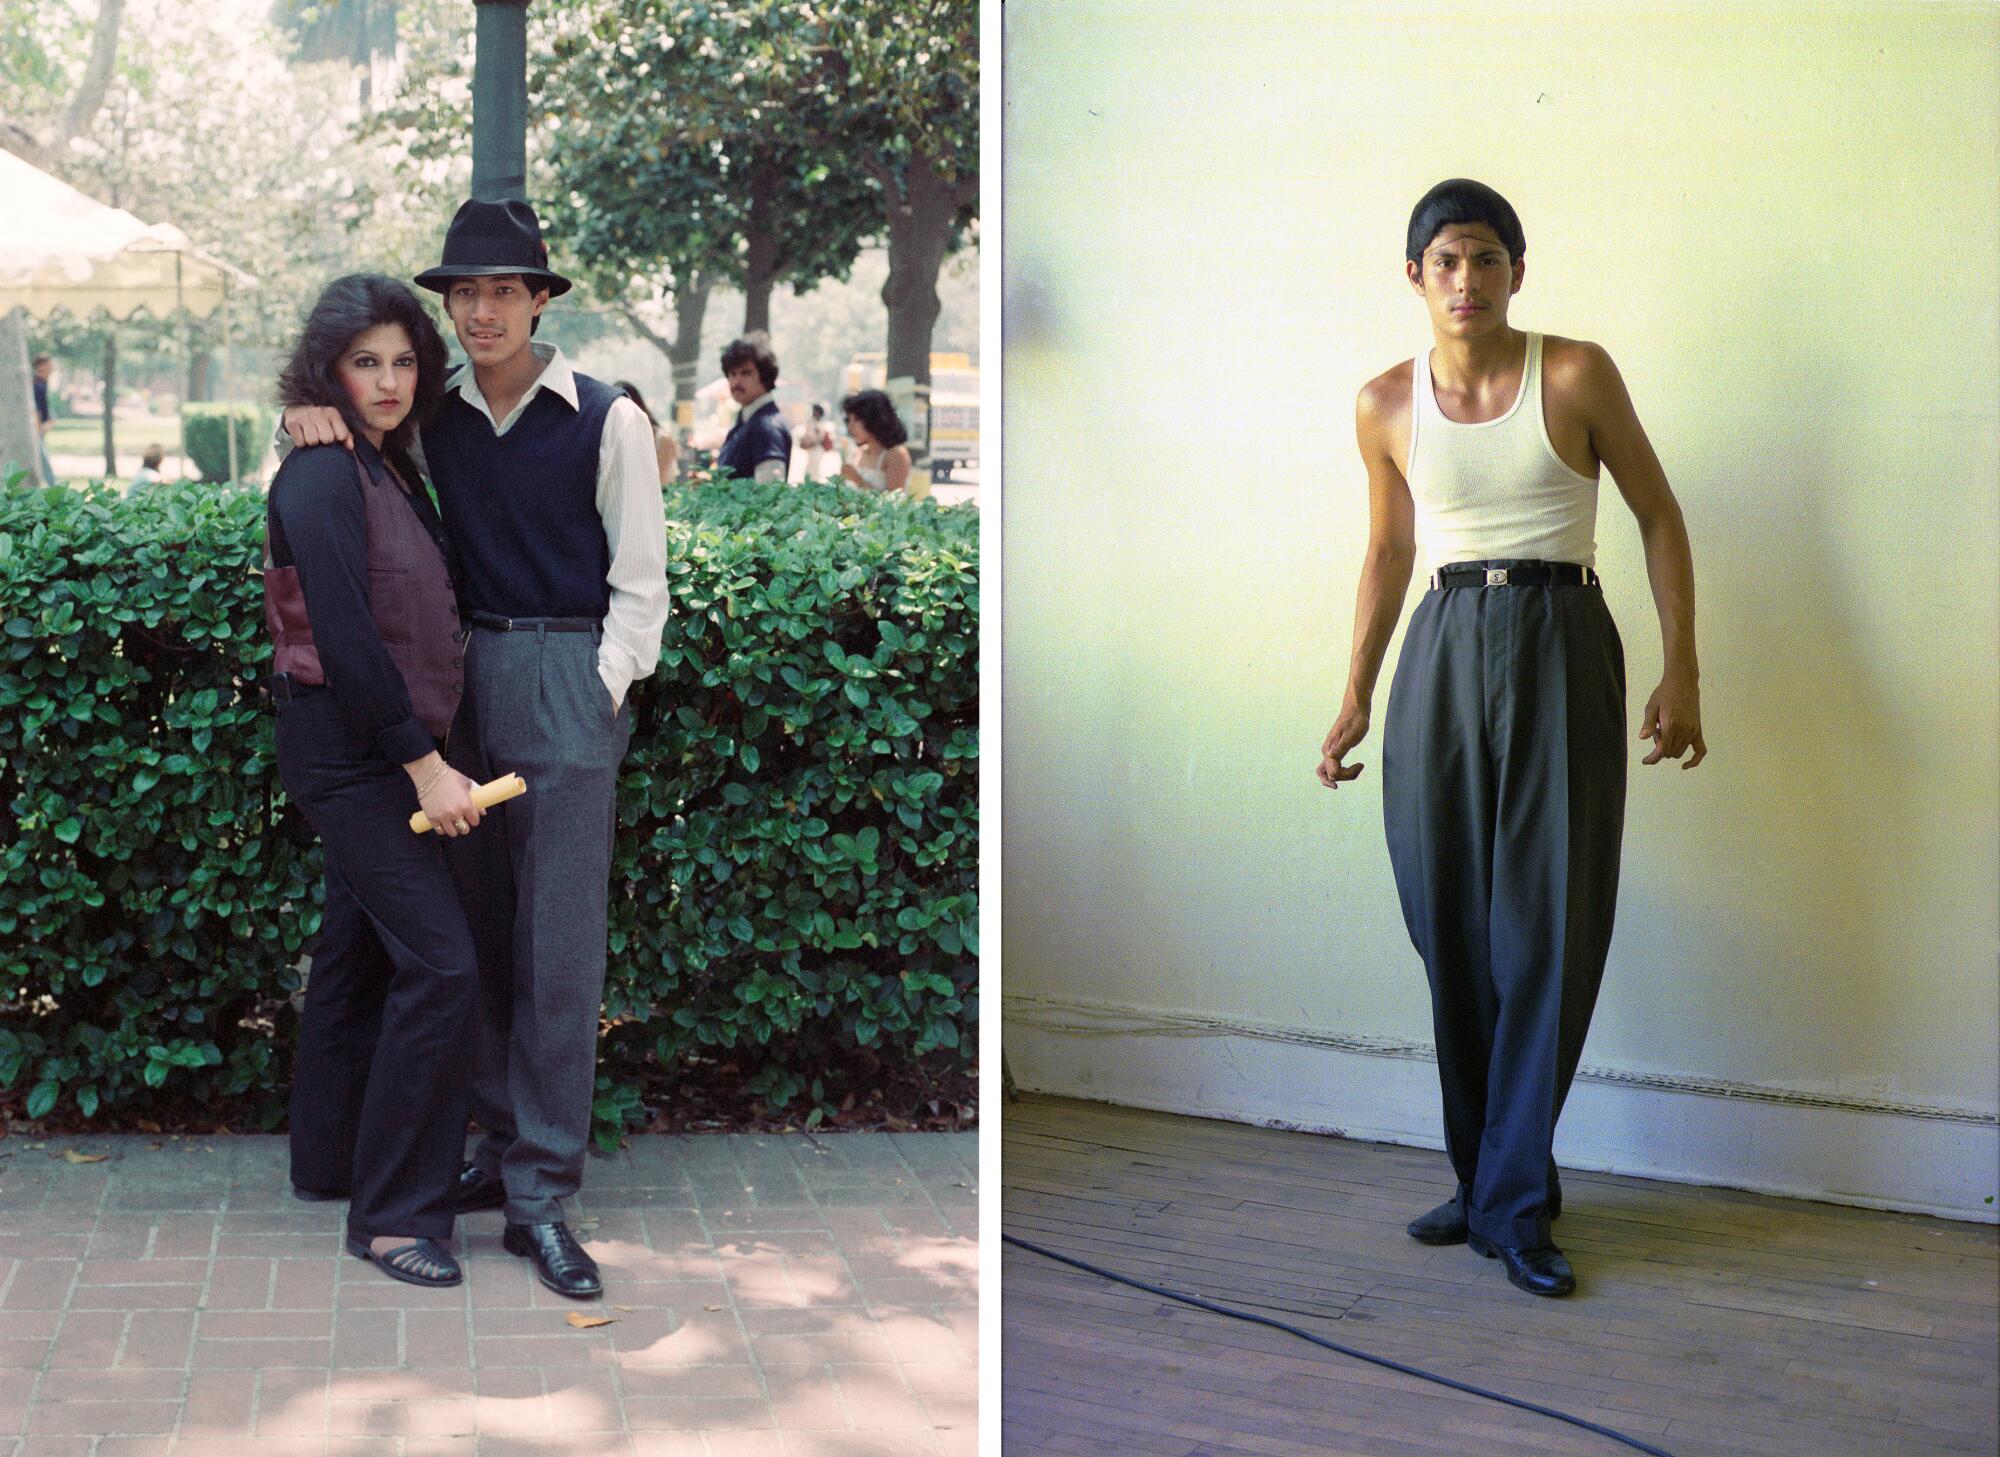 1970s photos show dapper couple (he wears a sweater vest and  fedora) and a skinny teen in pants that flare at the knee